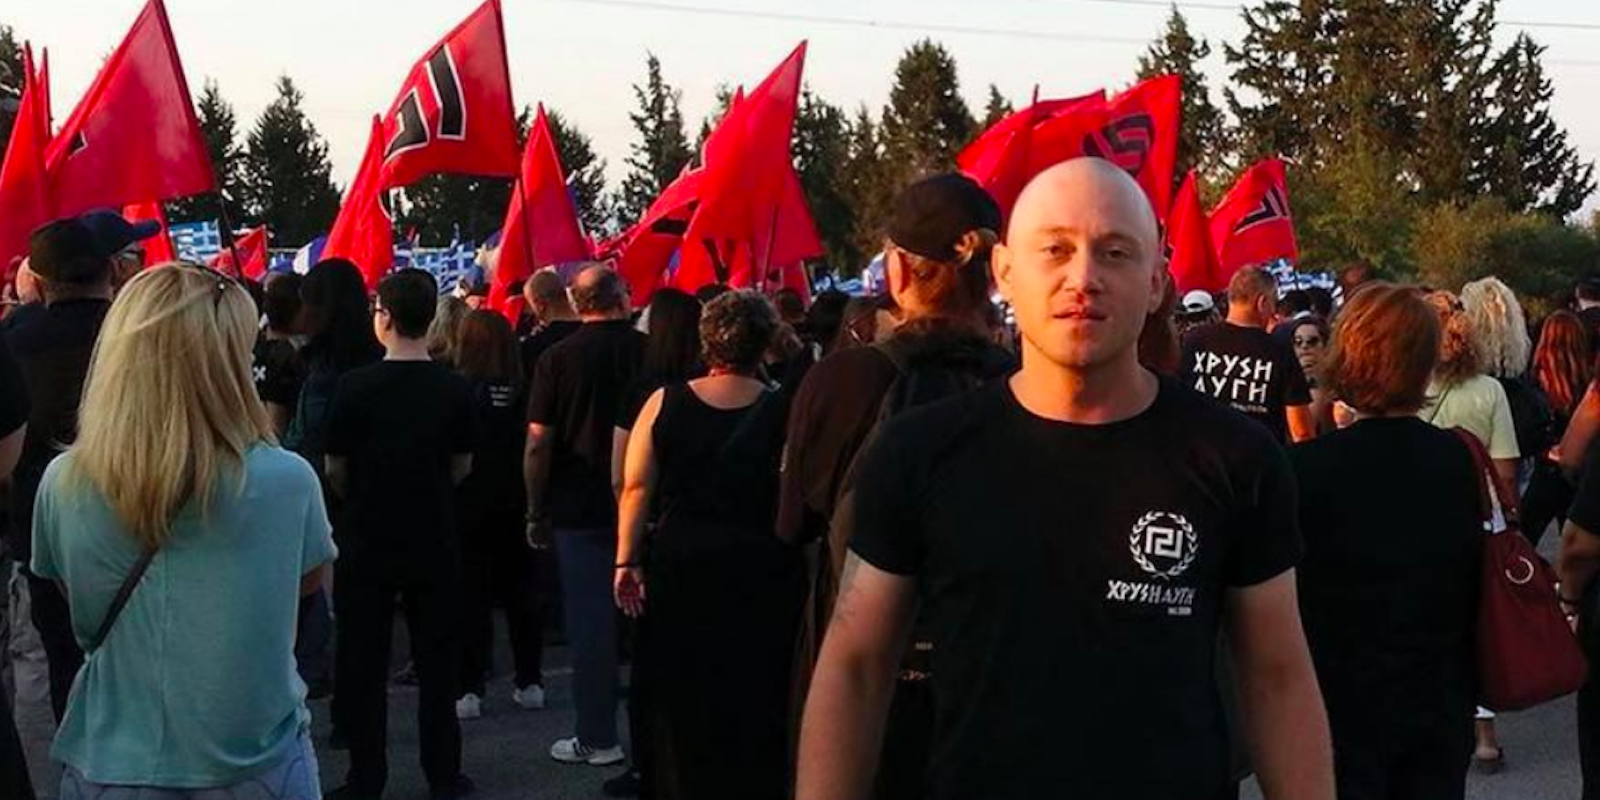 andrew anglin at nazi rally in Greece